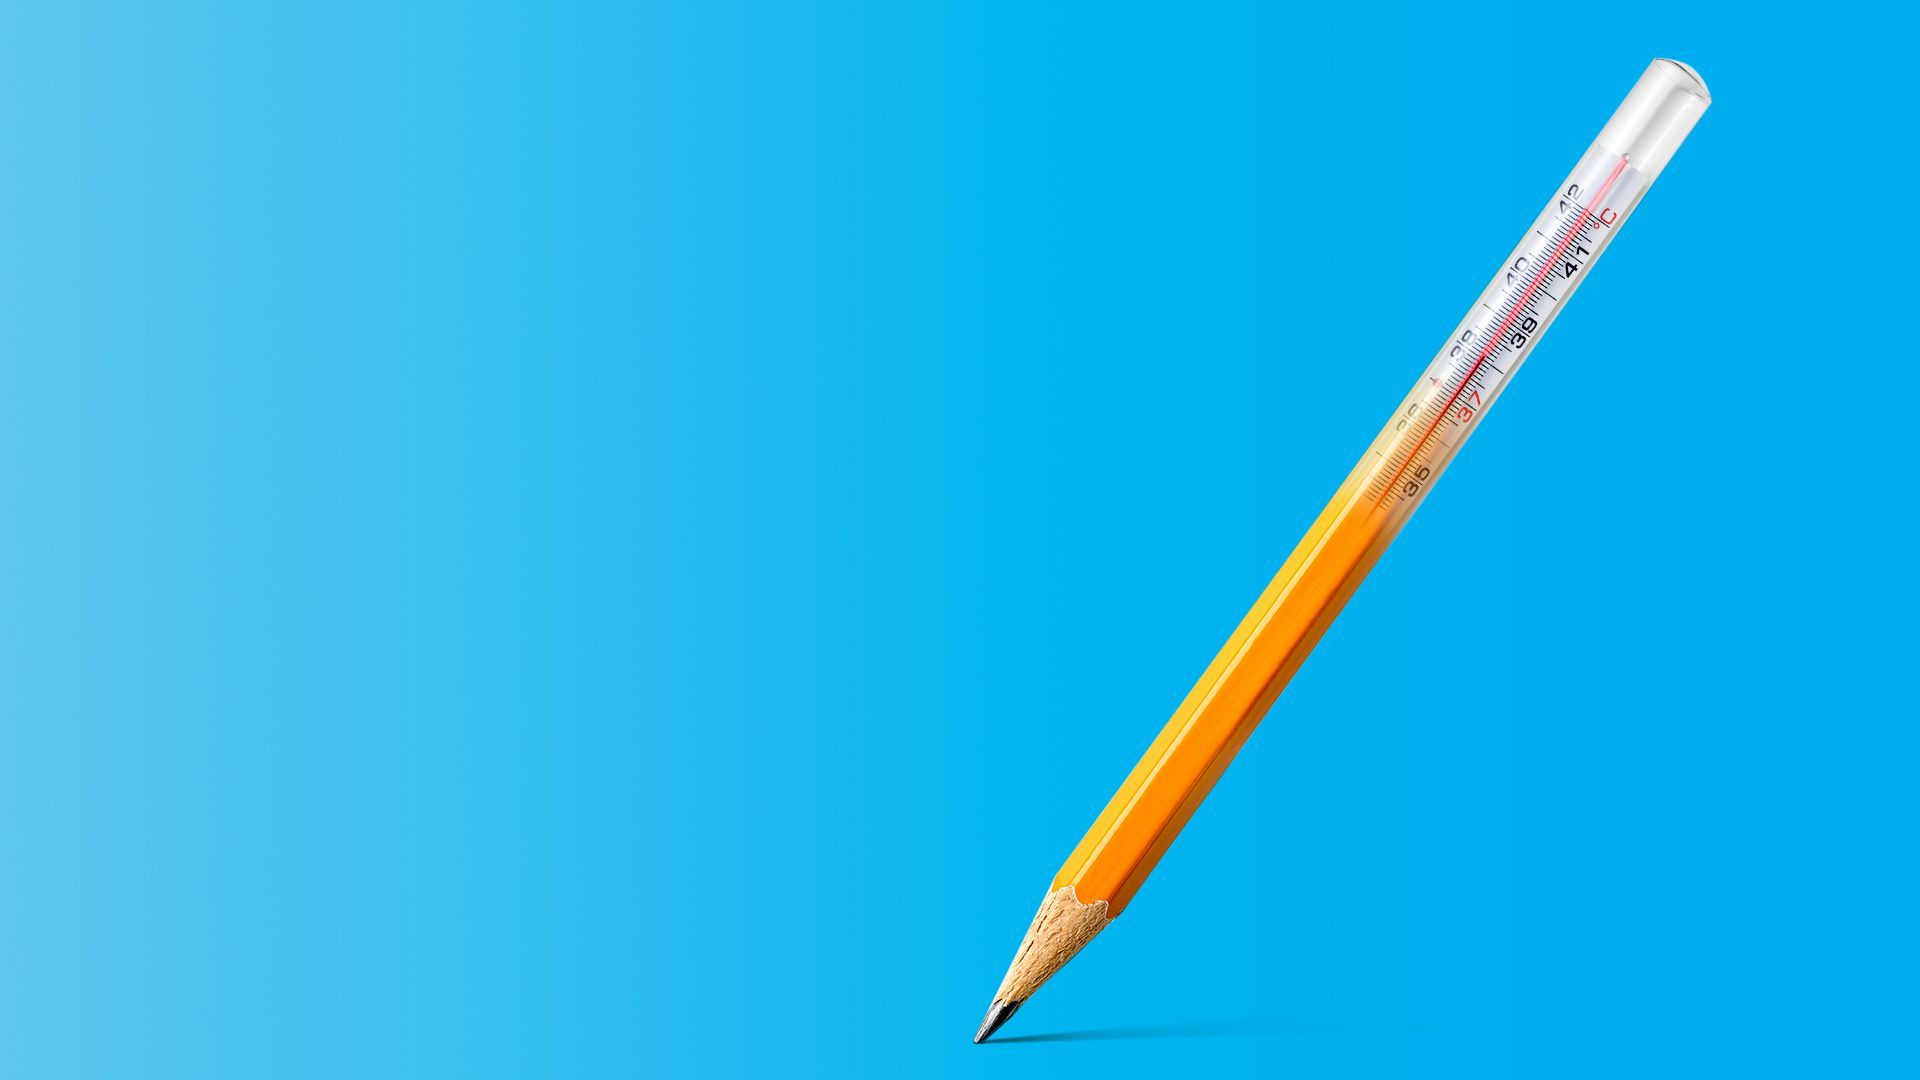 Illustration of a pencil morphing into a thermometer.